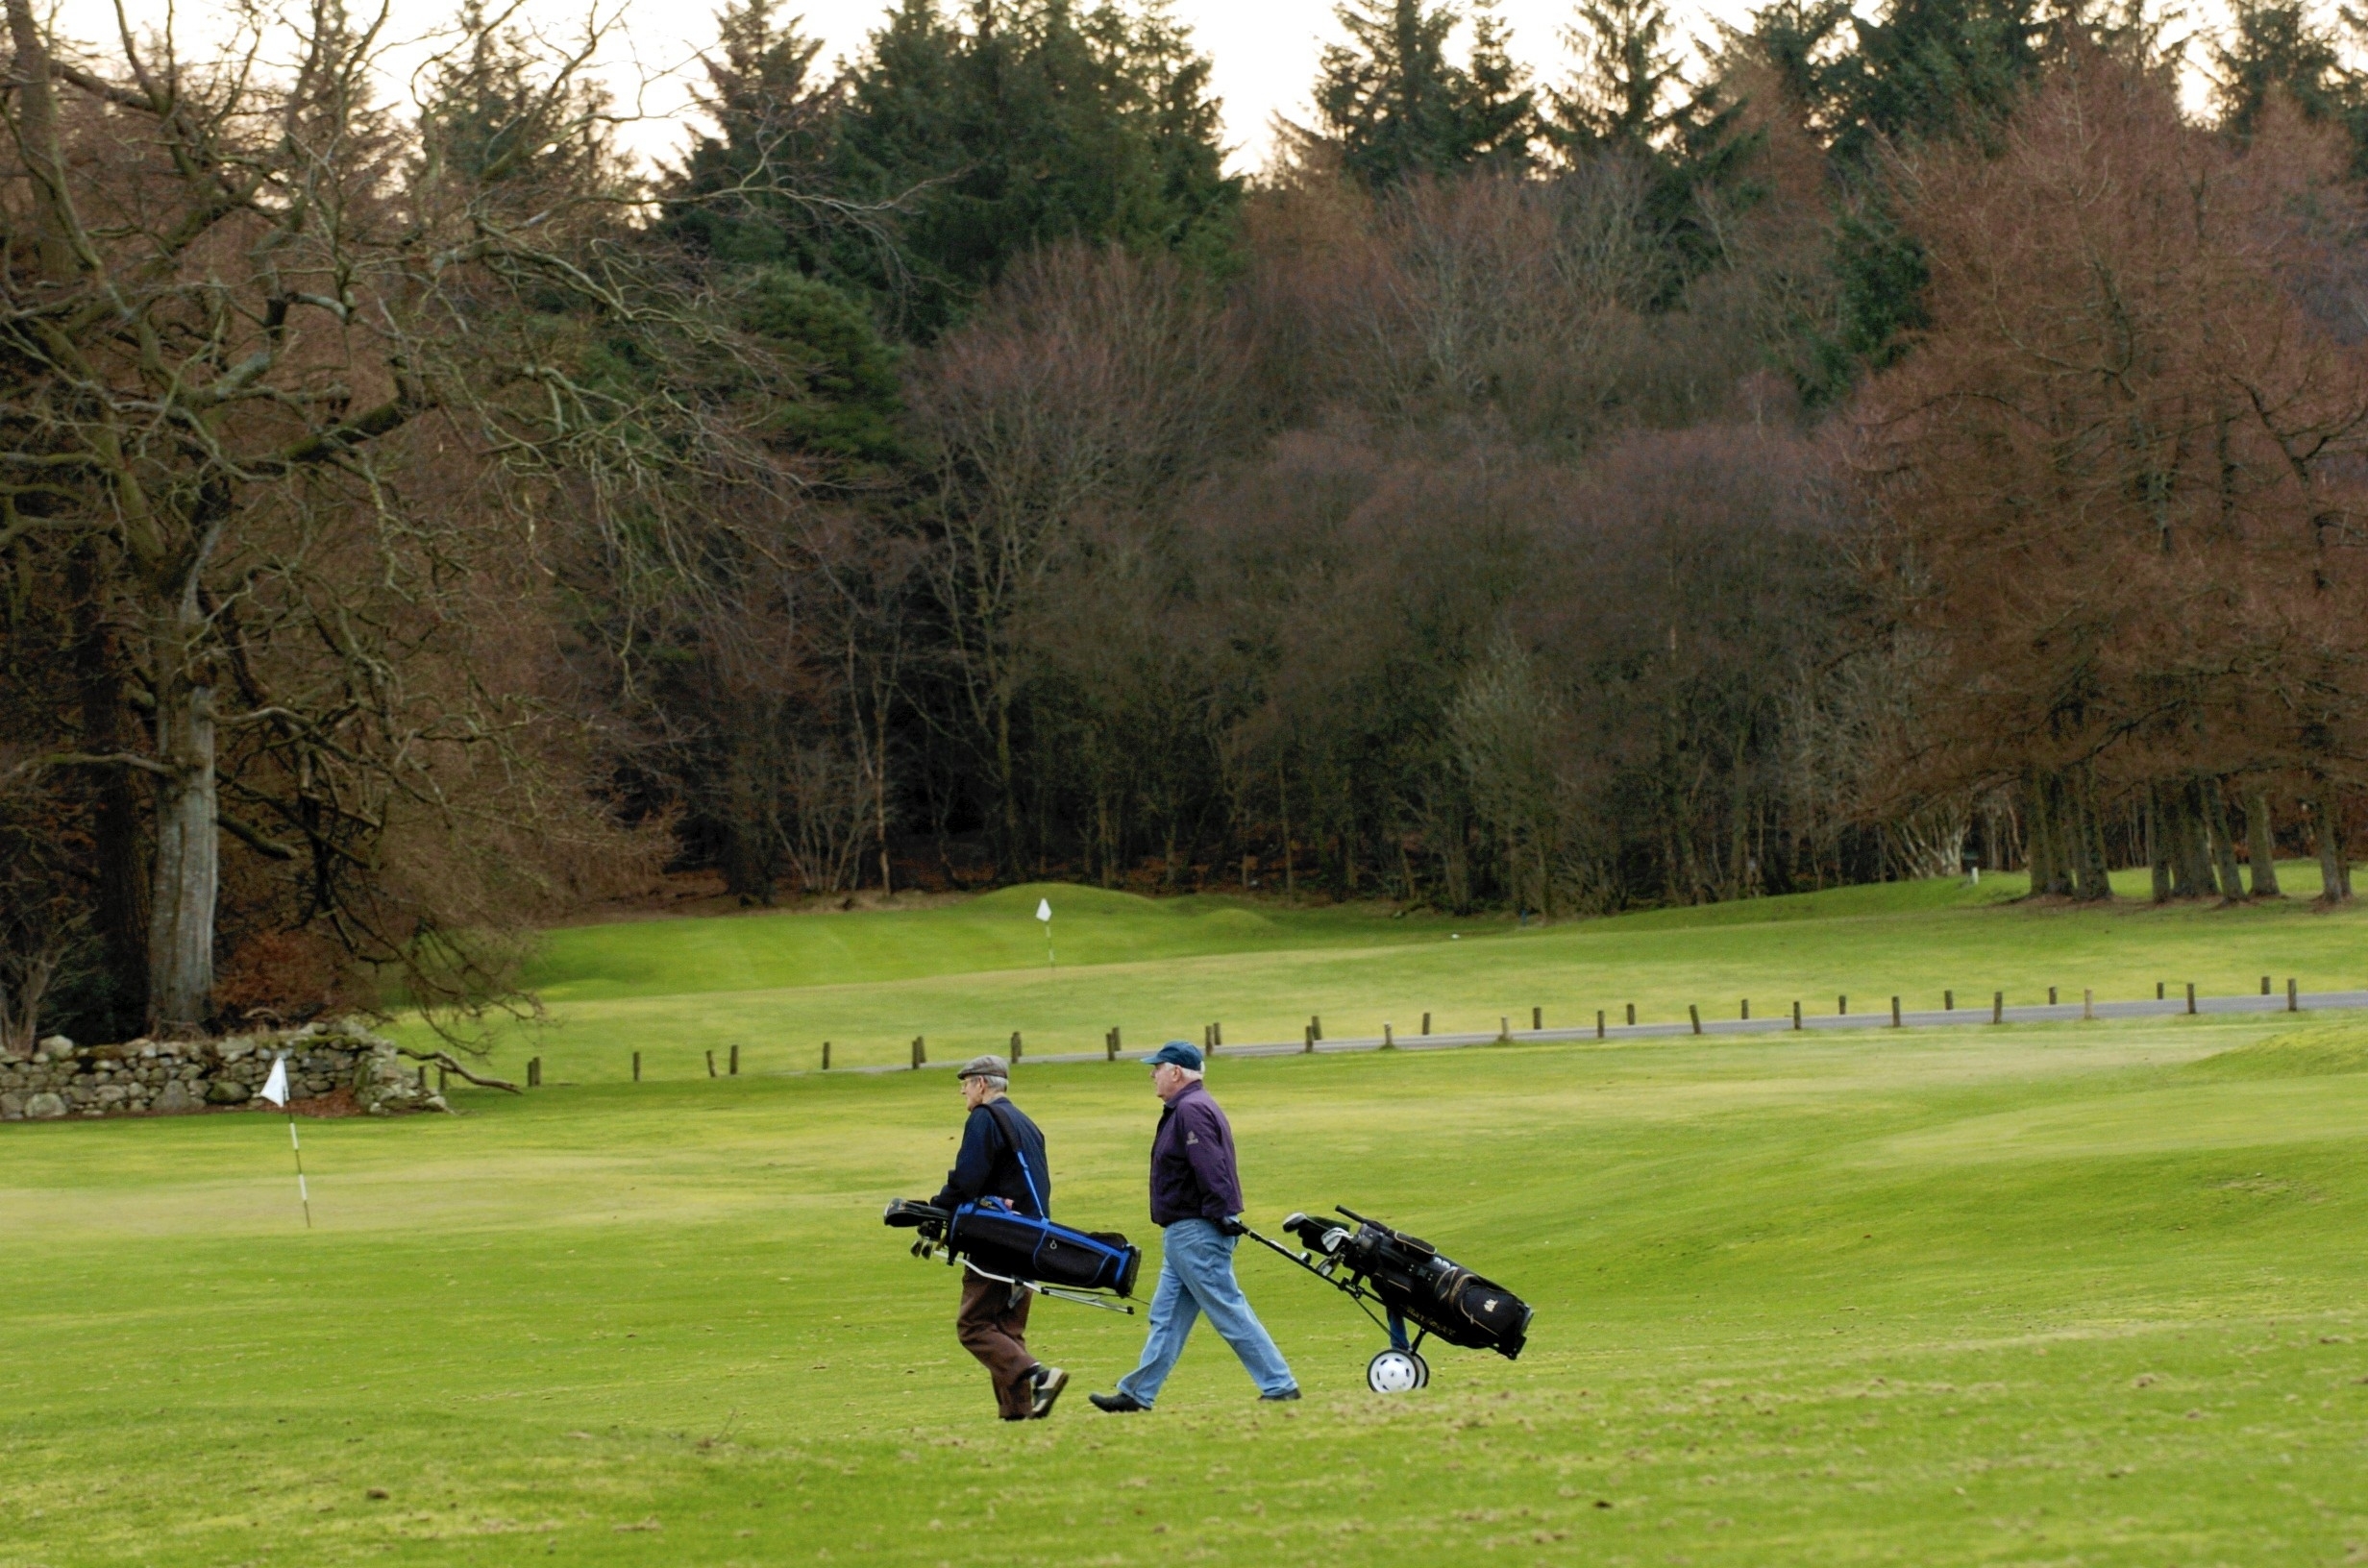 Golf's expected return will boost the grassroots.